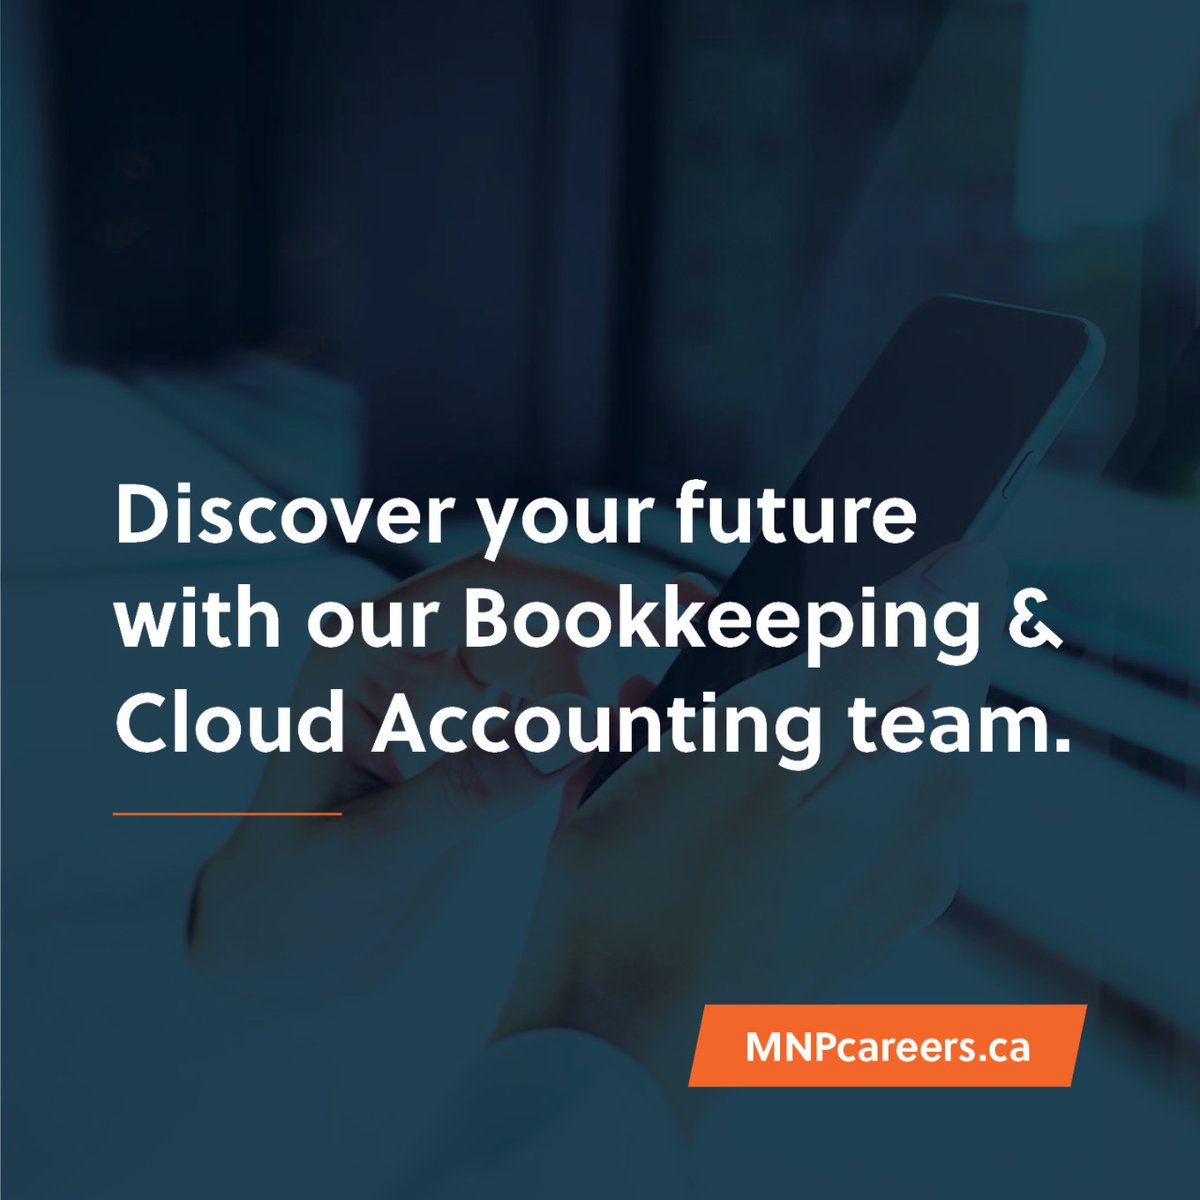 Ease is a digital accounting and bookkeeping solution that transforms real-time financial information into real-world business insights. Our ease team works with businesses to streamline their financial processes. Find your #LifeAtMNP at bit.ly/3tvEhSz